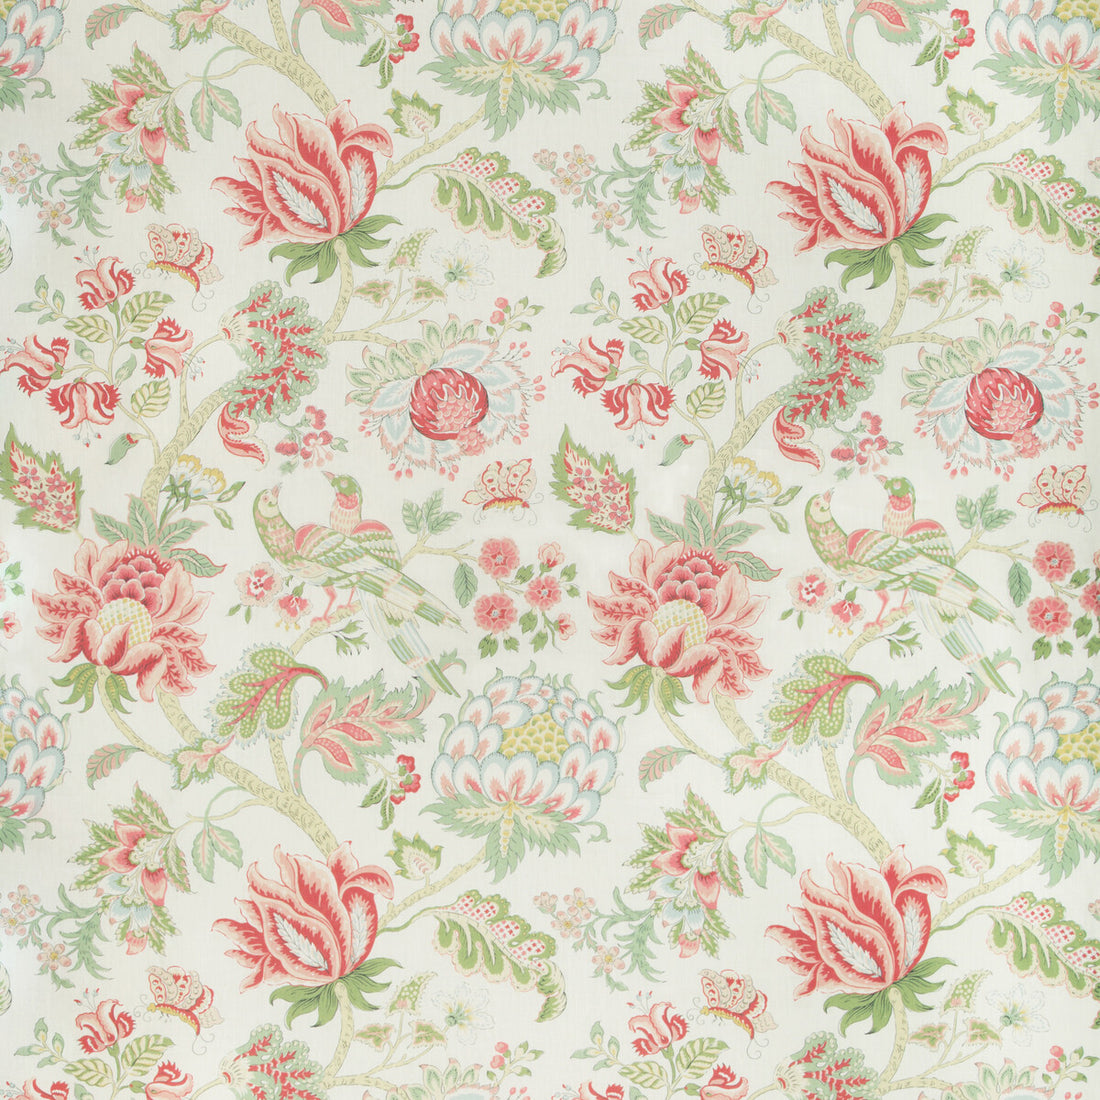 Lambrook fabric in peony color - pattern LAMBROOK.73.0 - by Kravet Basics in the Greenwich collection